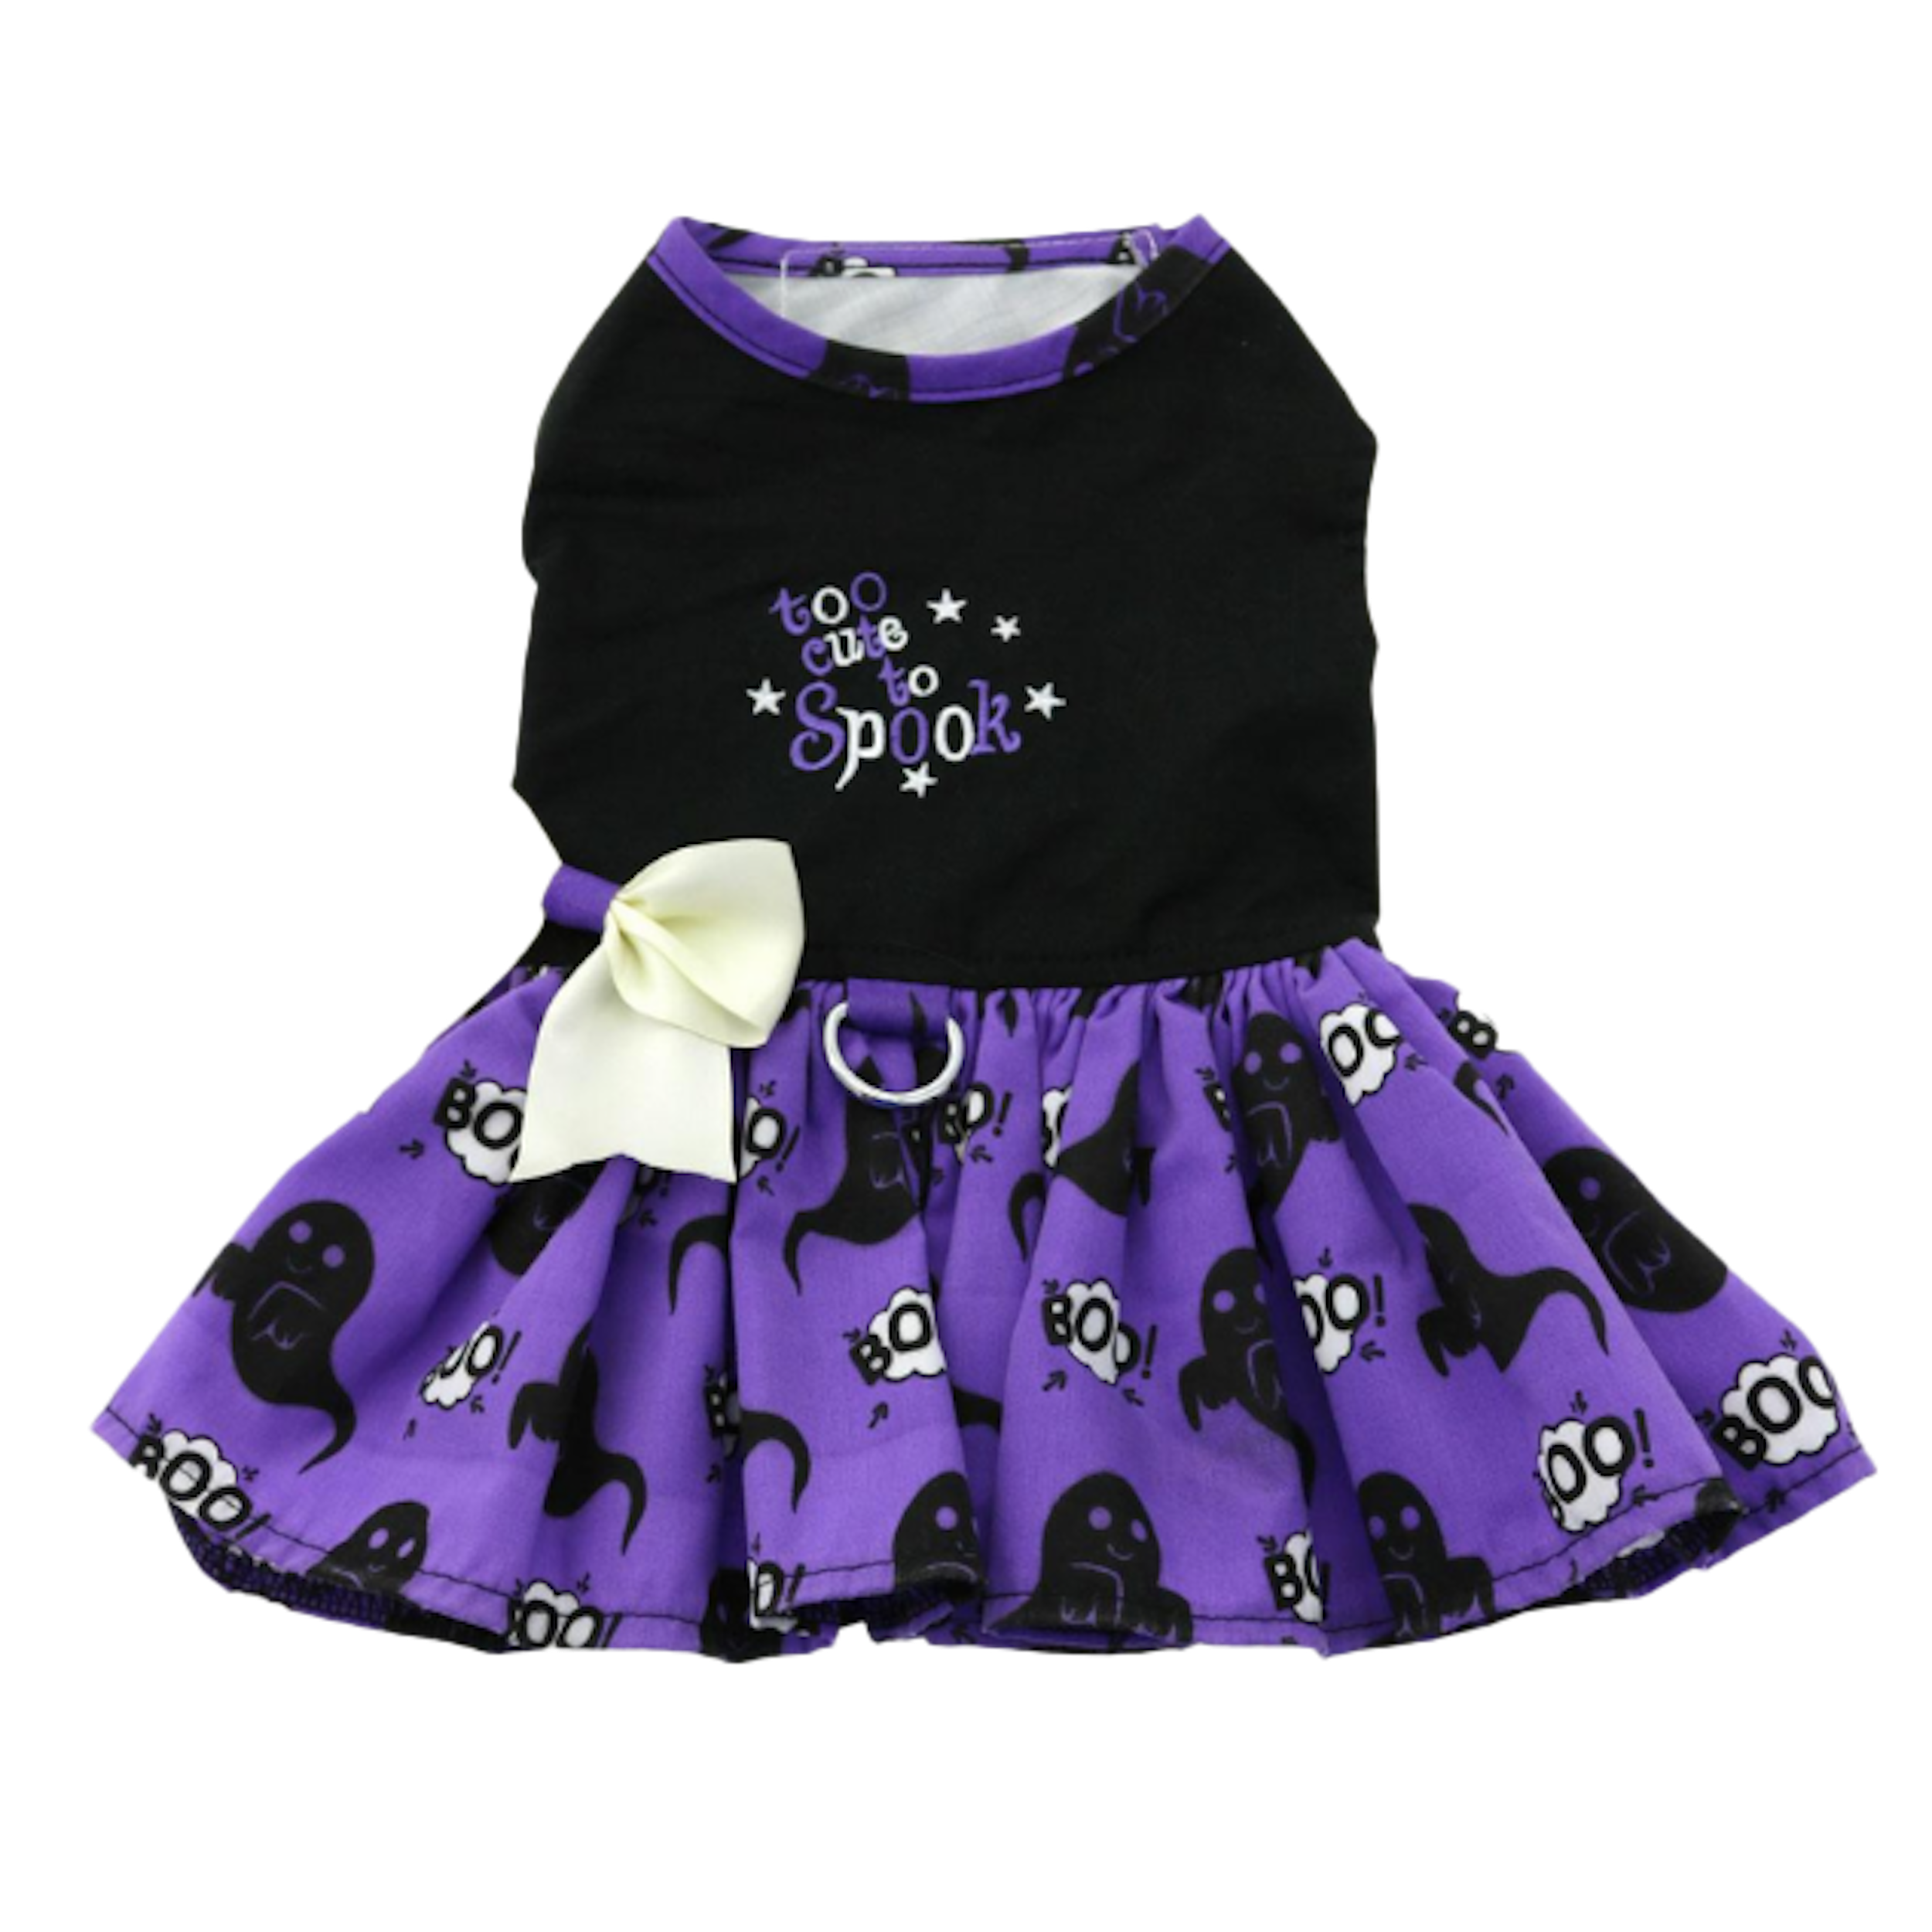 HALLOWEEN-TOO-CUTE-TO-SPOOK-DOG-PARTY-DRESS-BOULDERBARKS